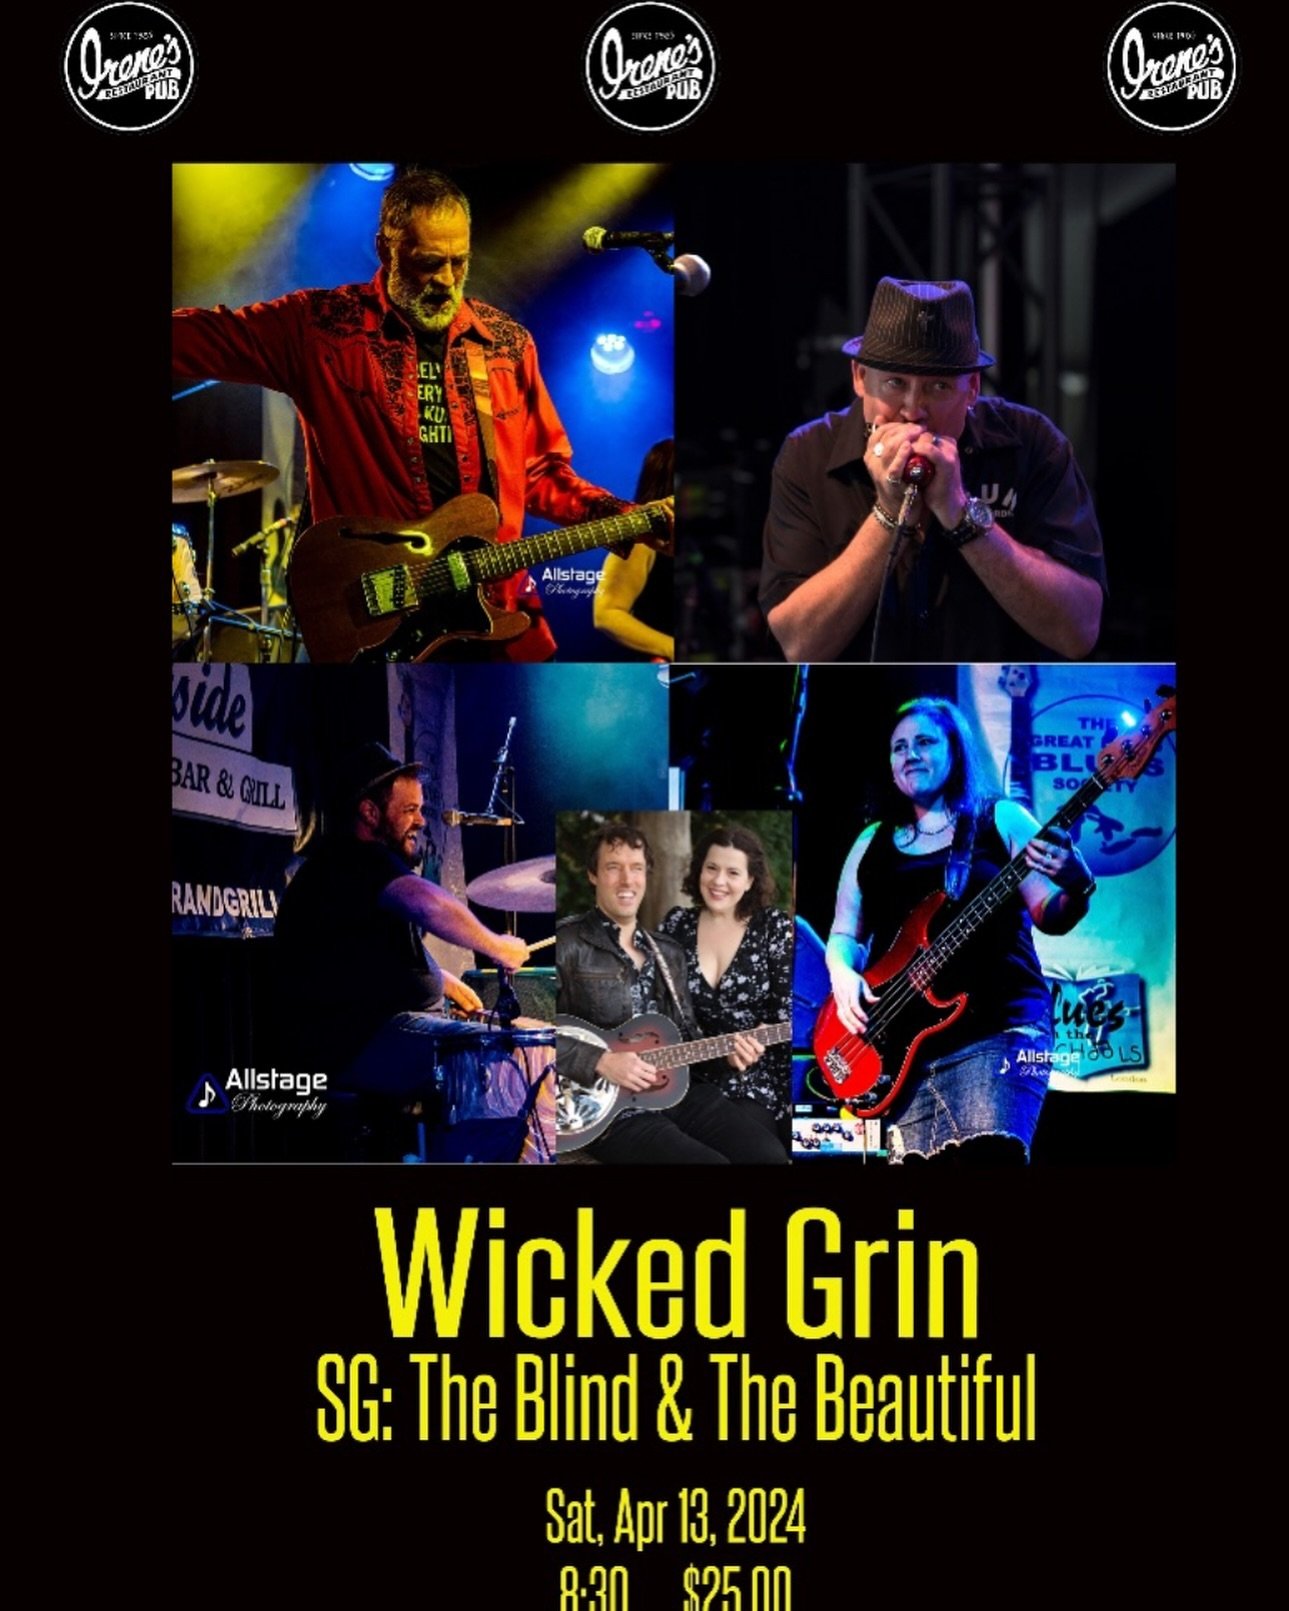 Wicked Grin with Special Guests The Blind &amp; the Beautiful at Irene&rsquo;s Saturday night! Tickets in the link in bio. #livemusic #ottawamusic #ottmusic #ottawamusicscene #blues #irenespub